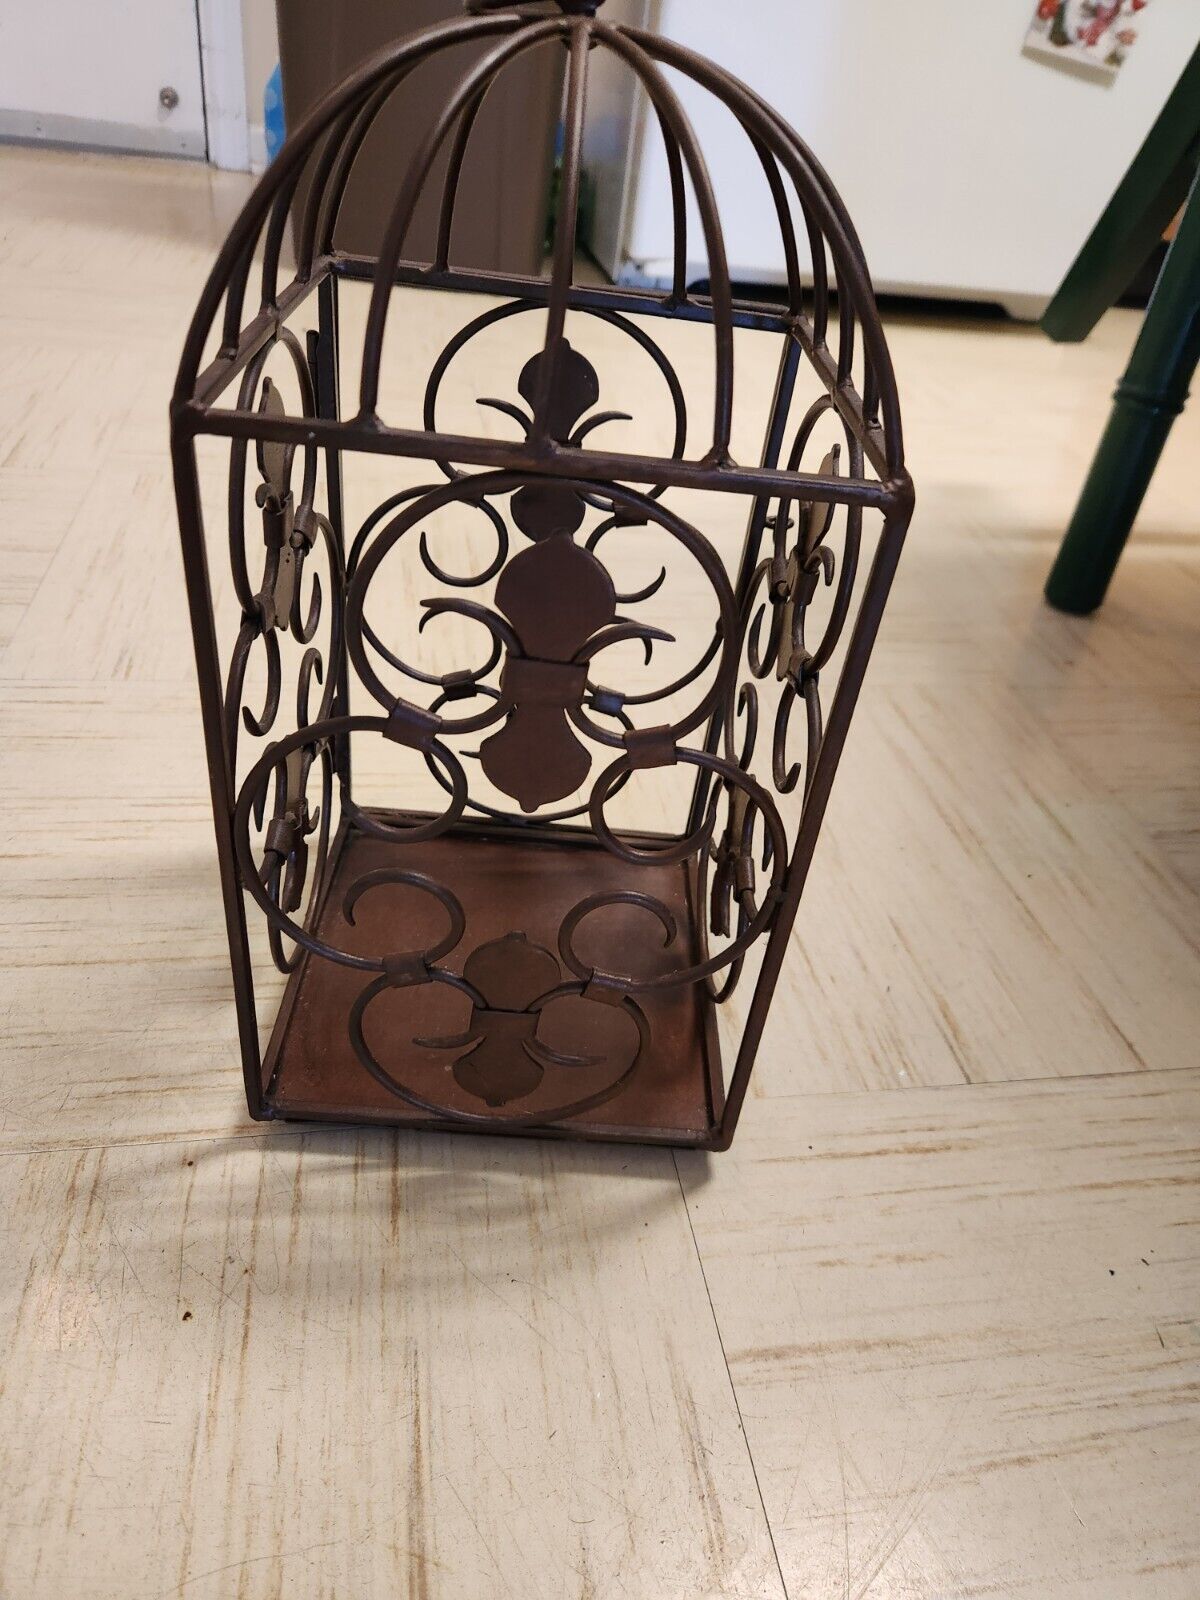 A Bird Cage Or Candle Holder